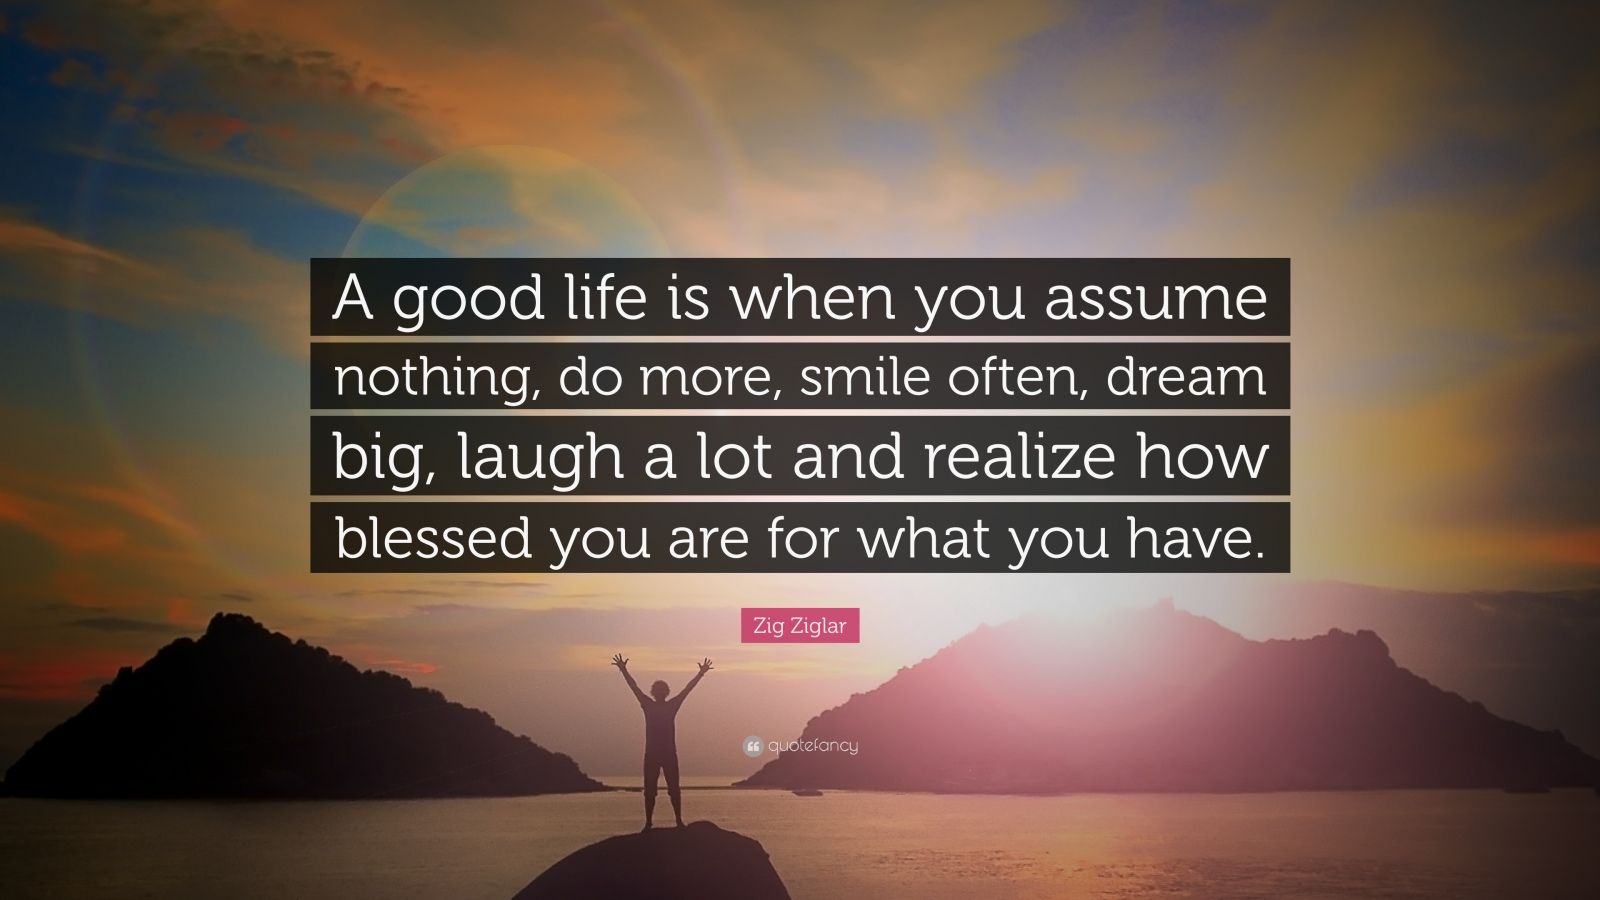 a good life is when you assume nothing, do more, smile often